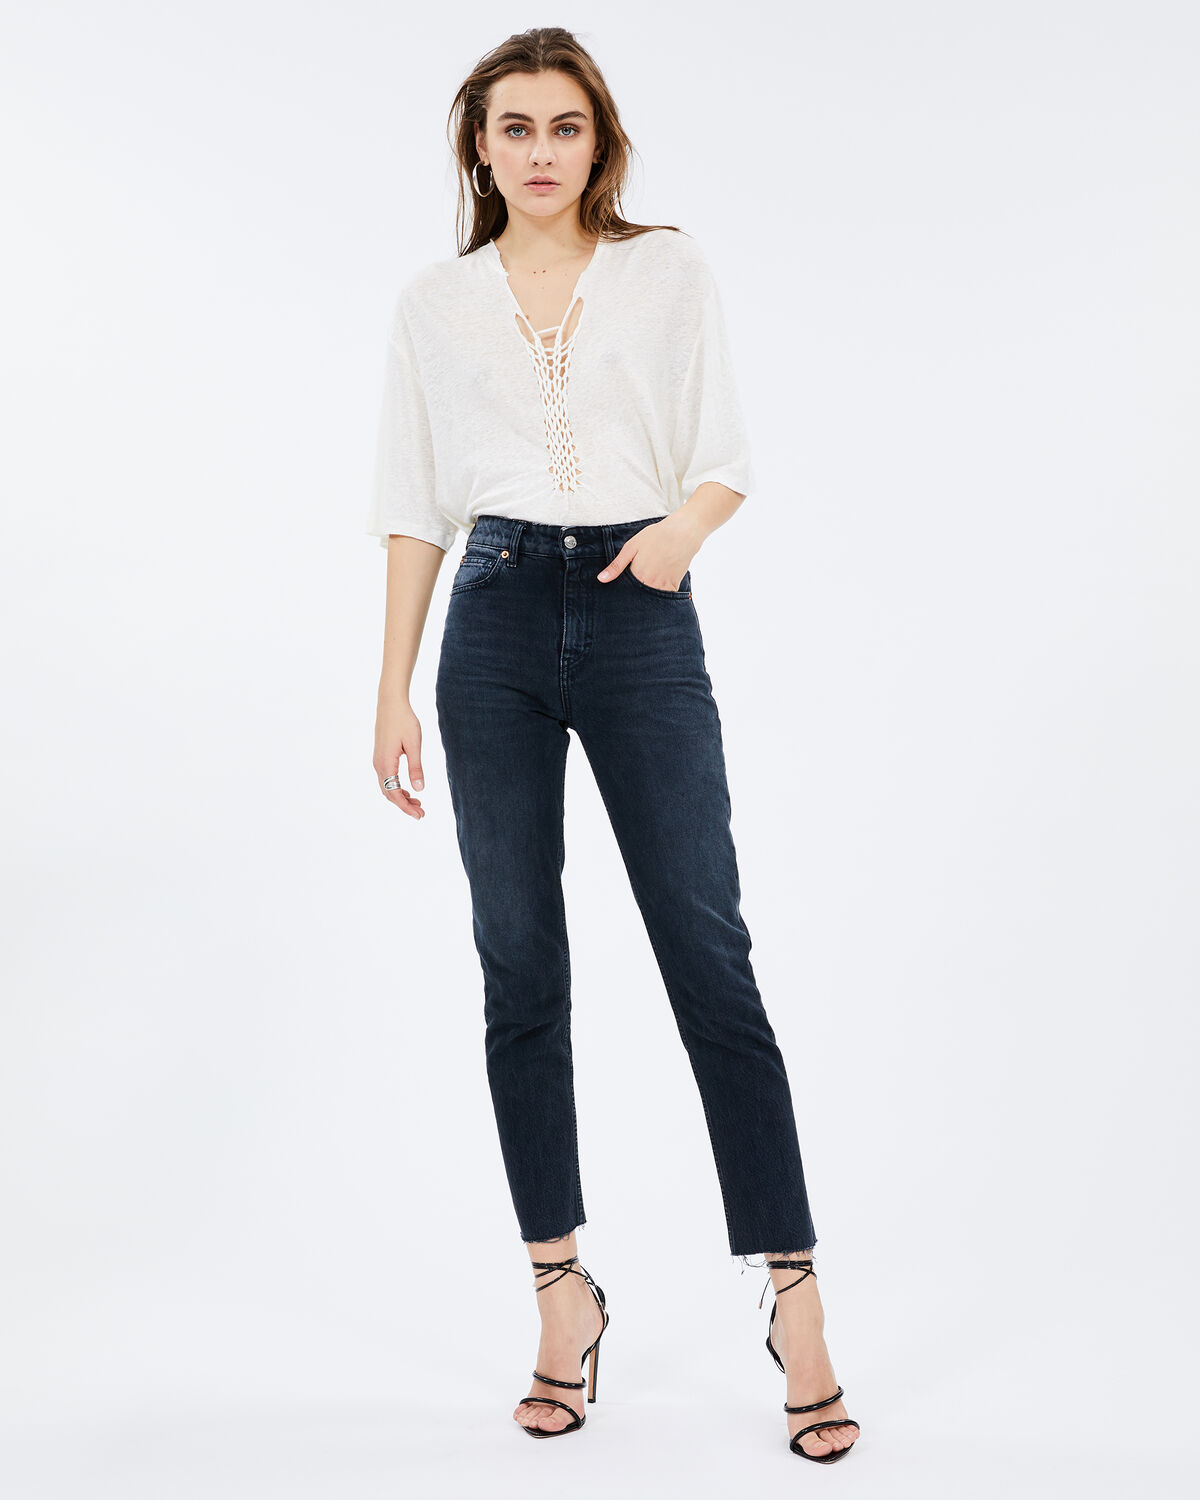 Photo of IRO Paris Kind T-Shirt Off White - This Linen Top Is Distinguished By Its Frayed Details And Slightly Oversized Fit. Its Braiding Set Will Enhance Your Neckline. For A Casual Look, Wear It With Raw Jeans And For A More Elegant Look, Combine It With A Leather Skirt. T-Shirts